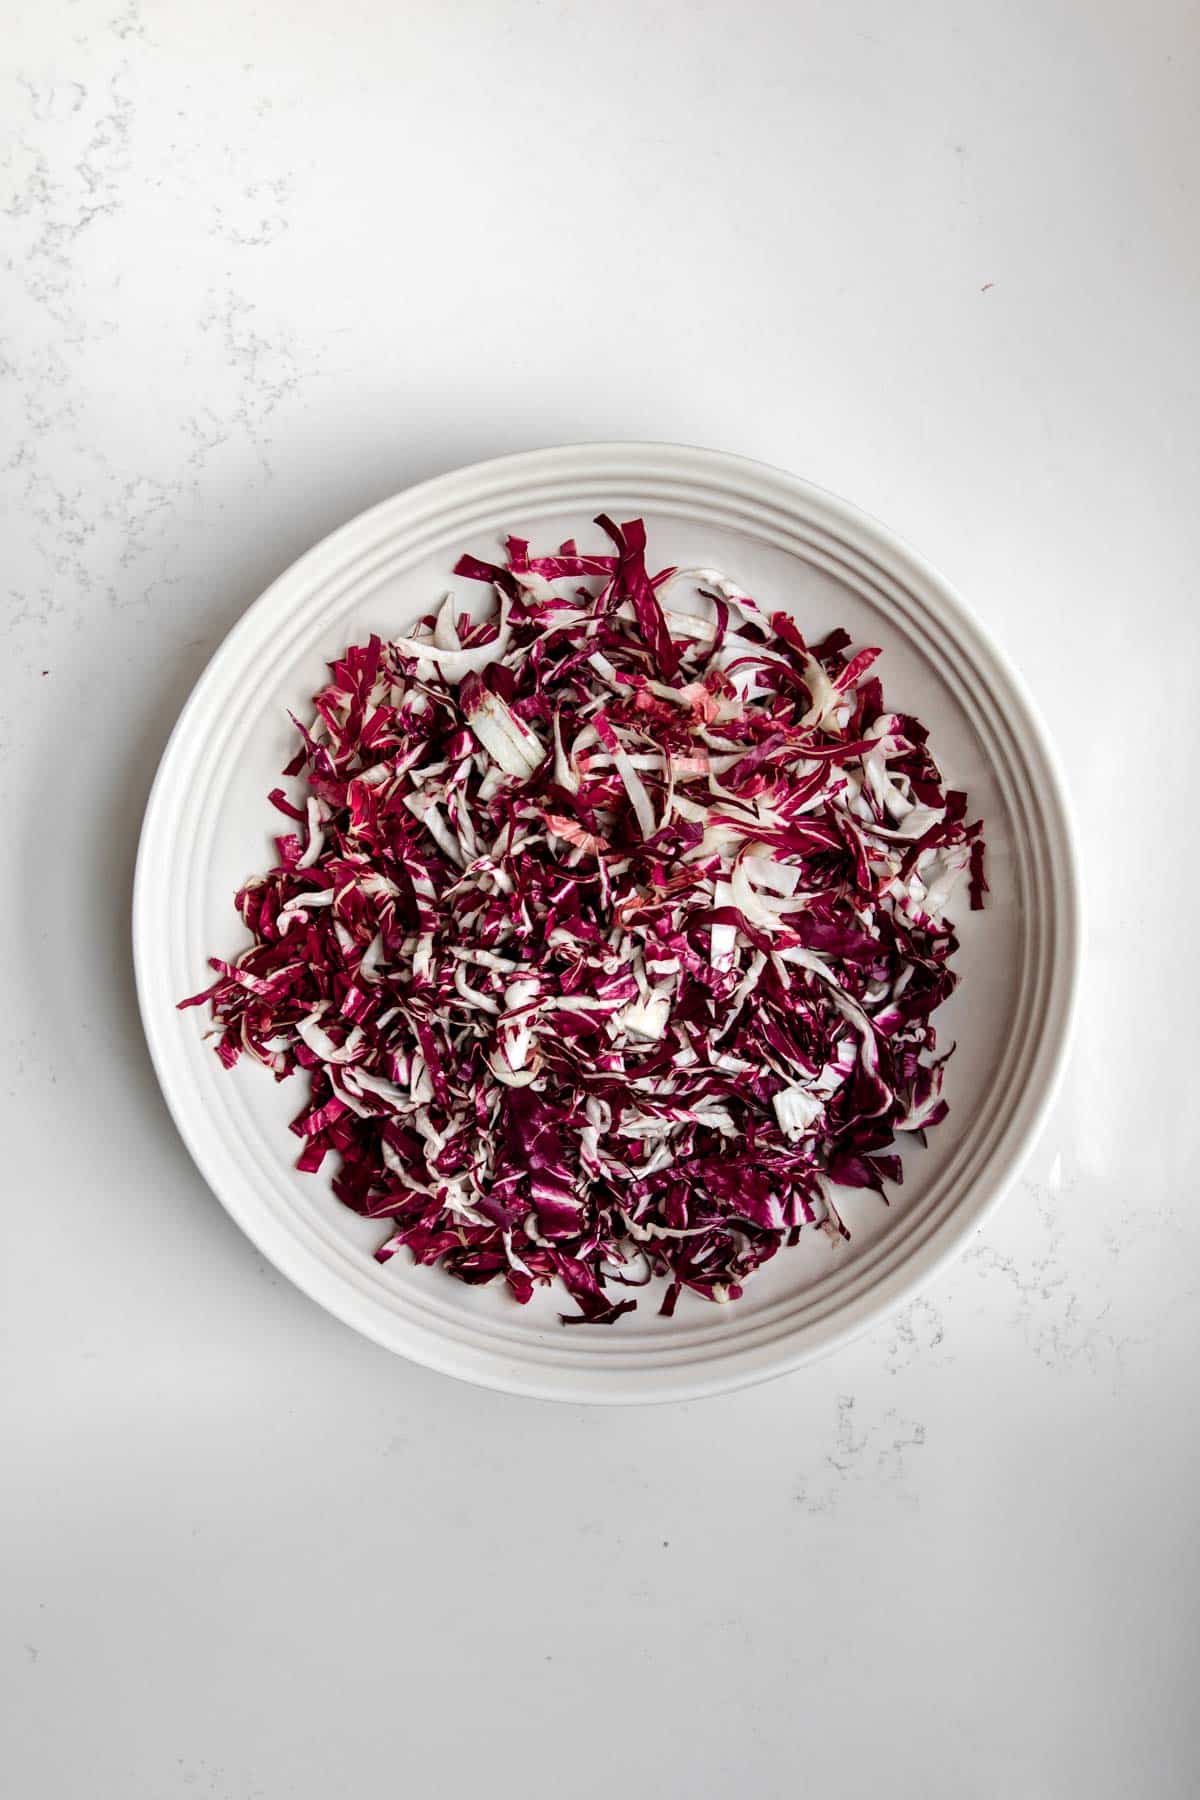 Shredded radicchio in a large white bowl on a white table.